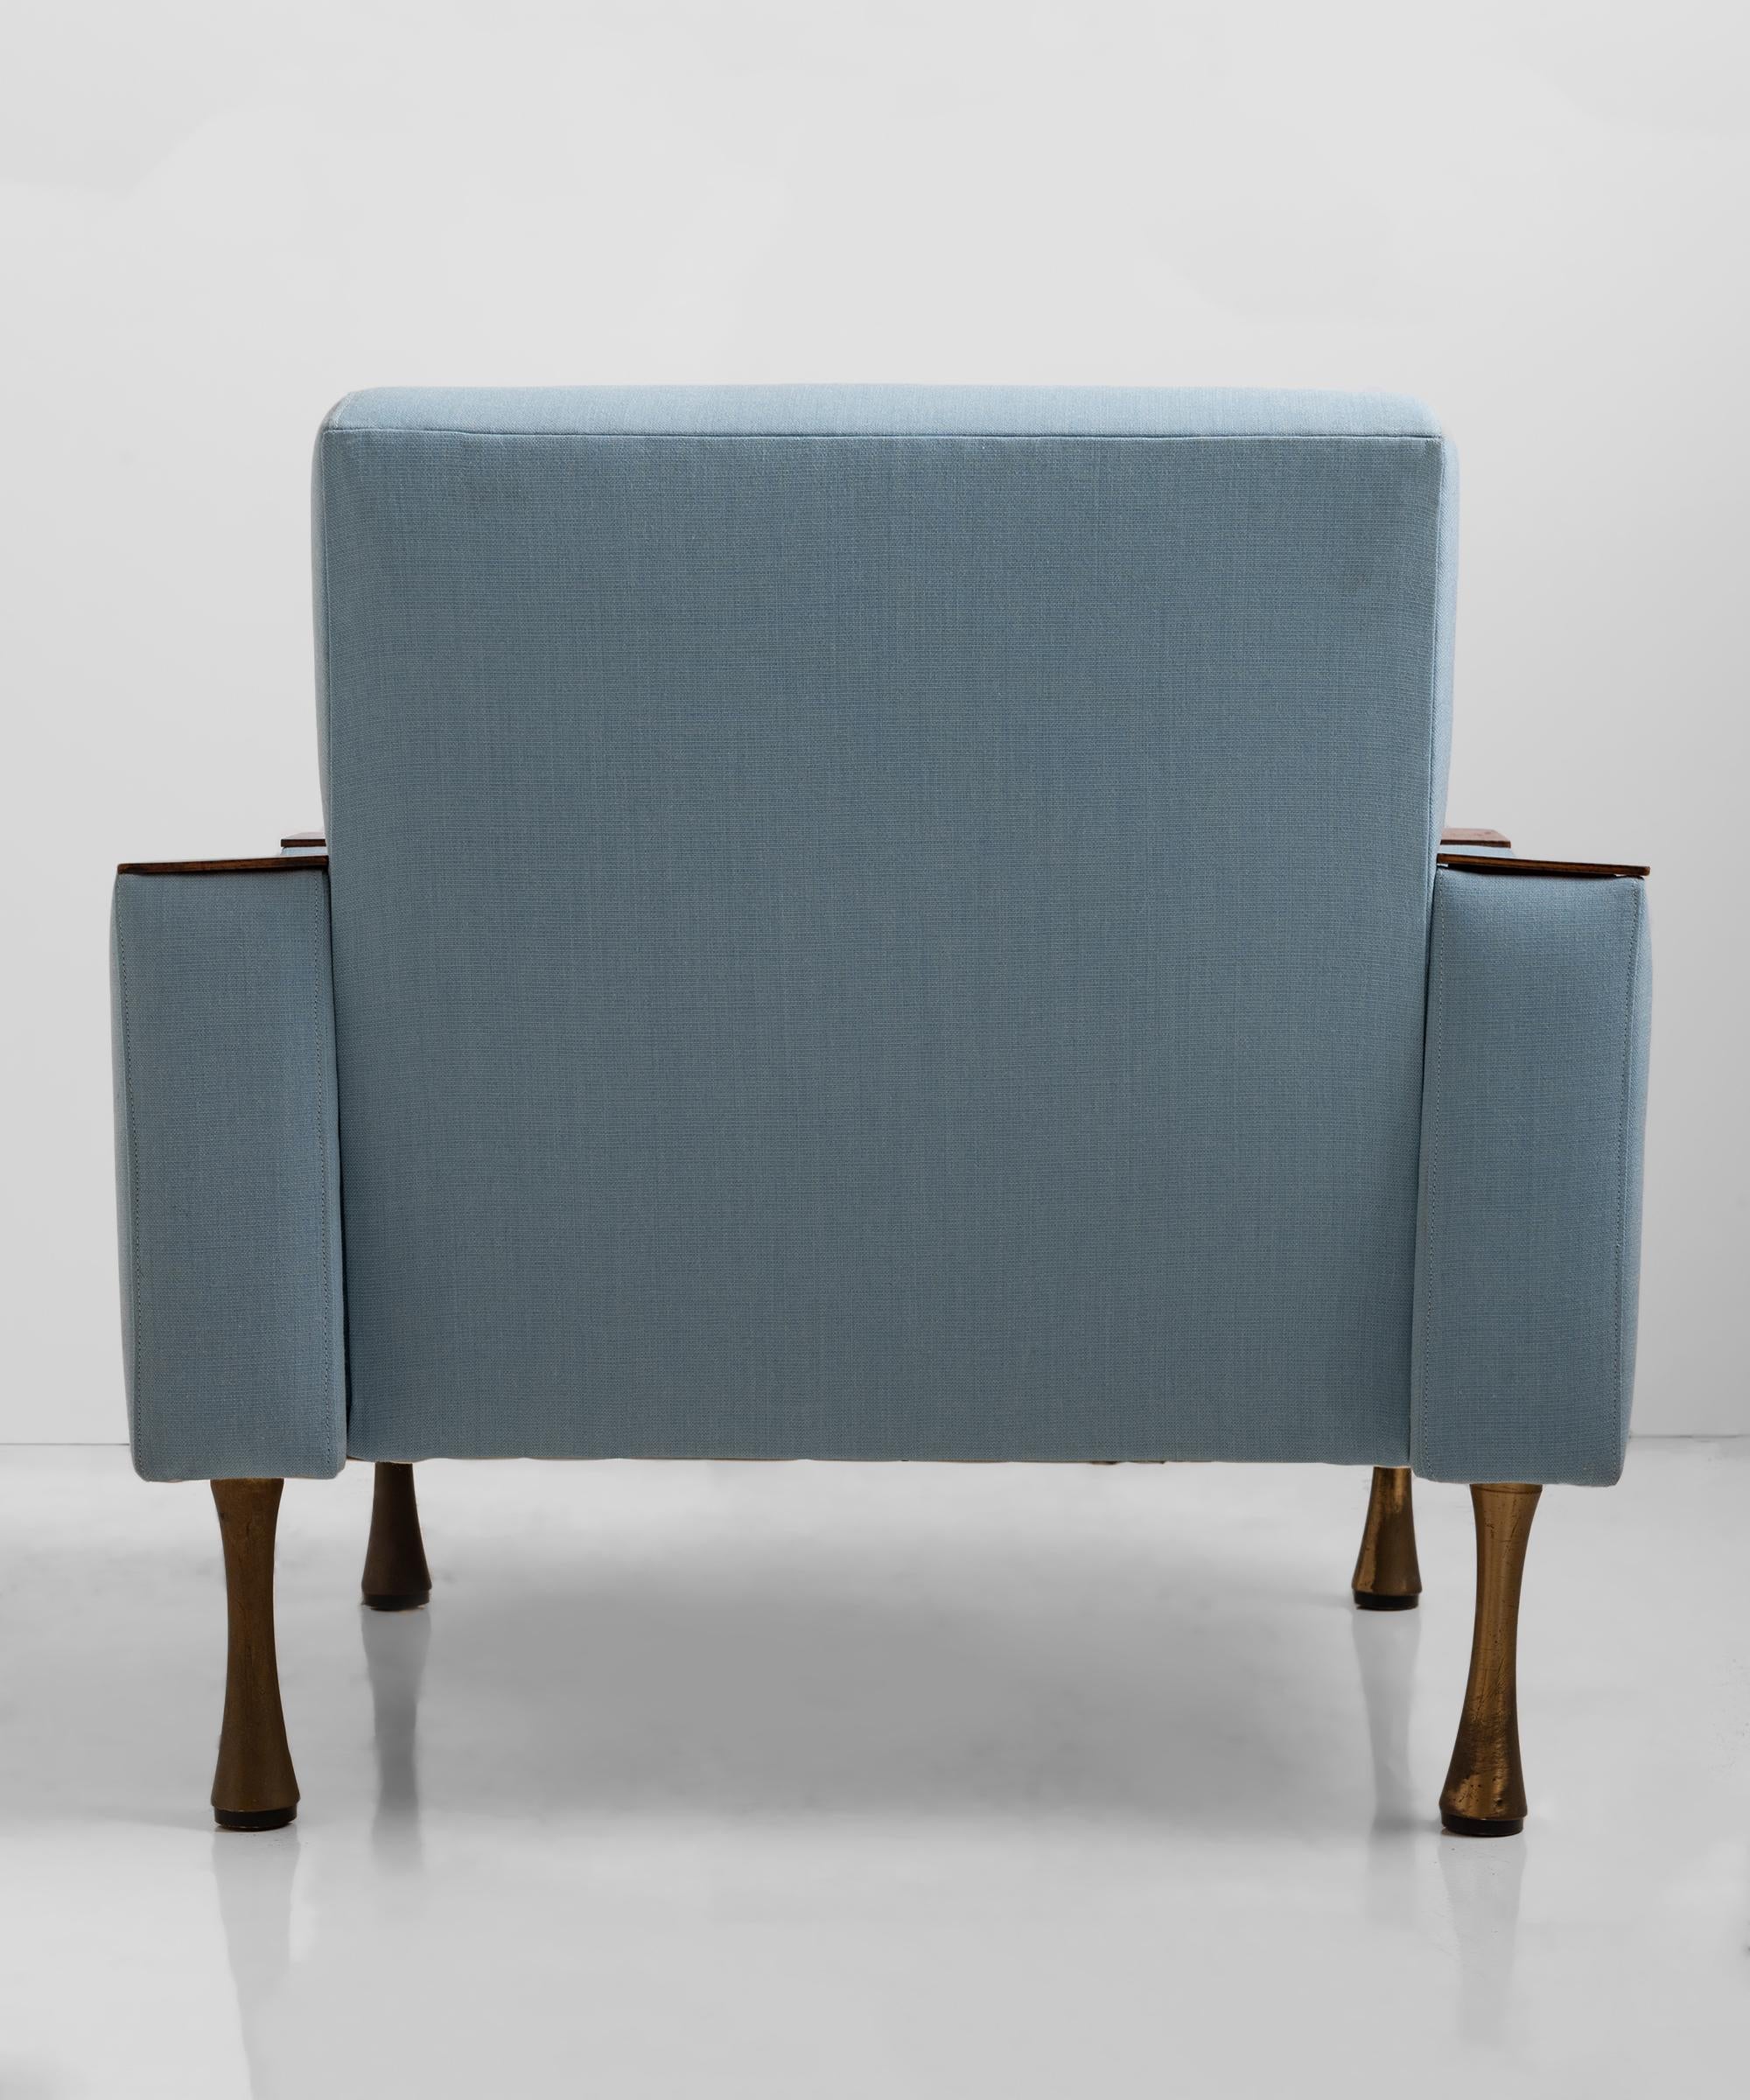 Modern Angelo Mangiarotti Armchair in Wool Blend from Maharam, Italy, circa 1960